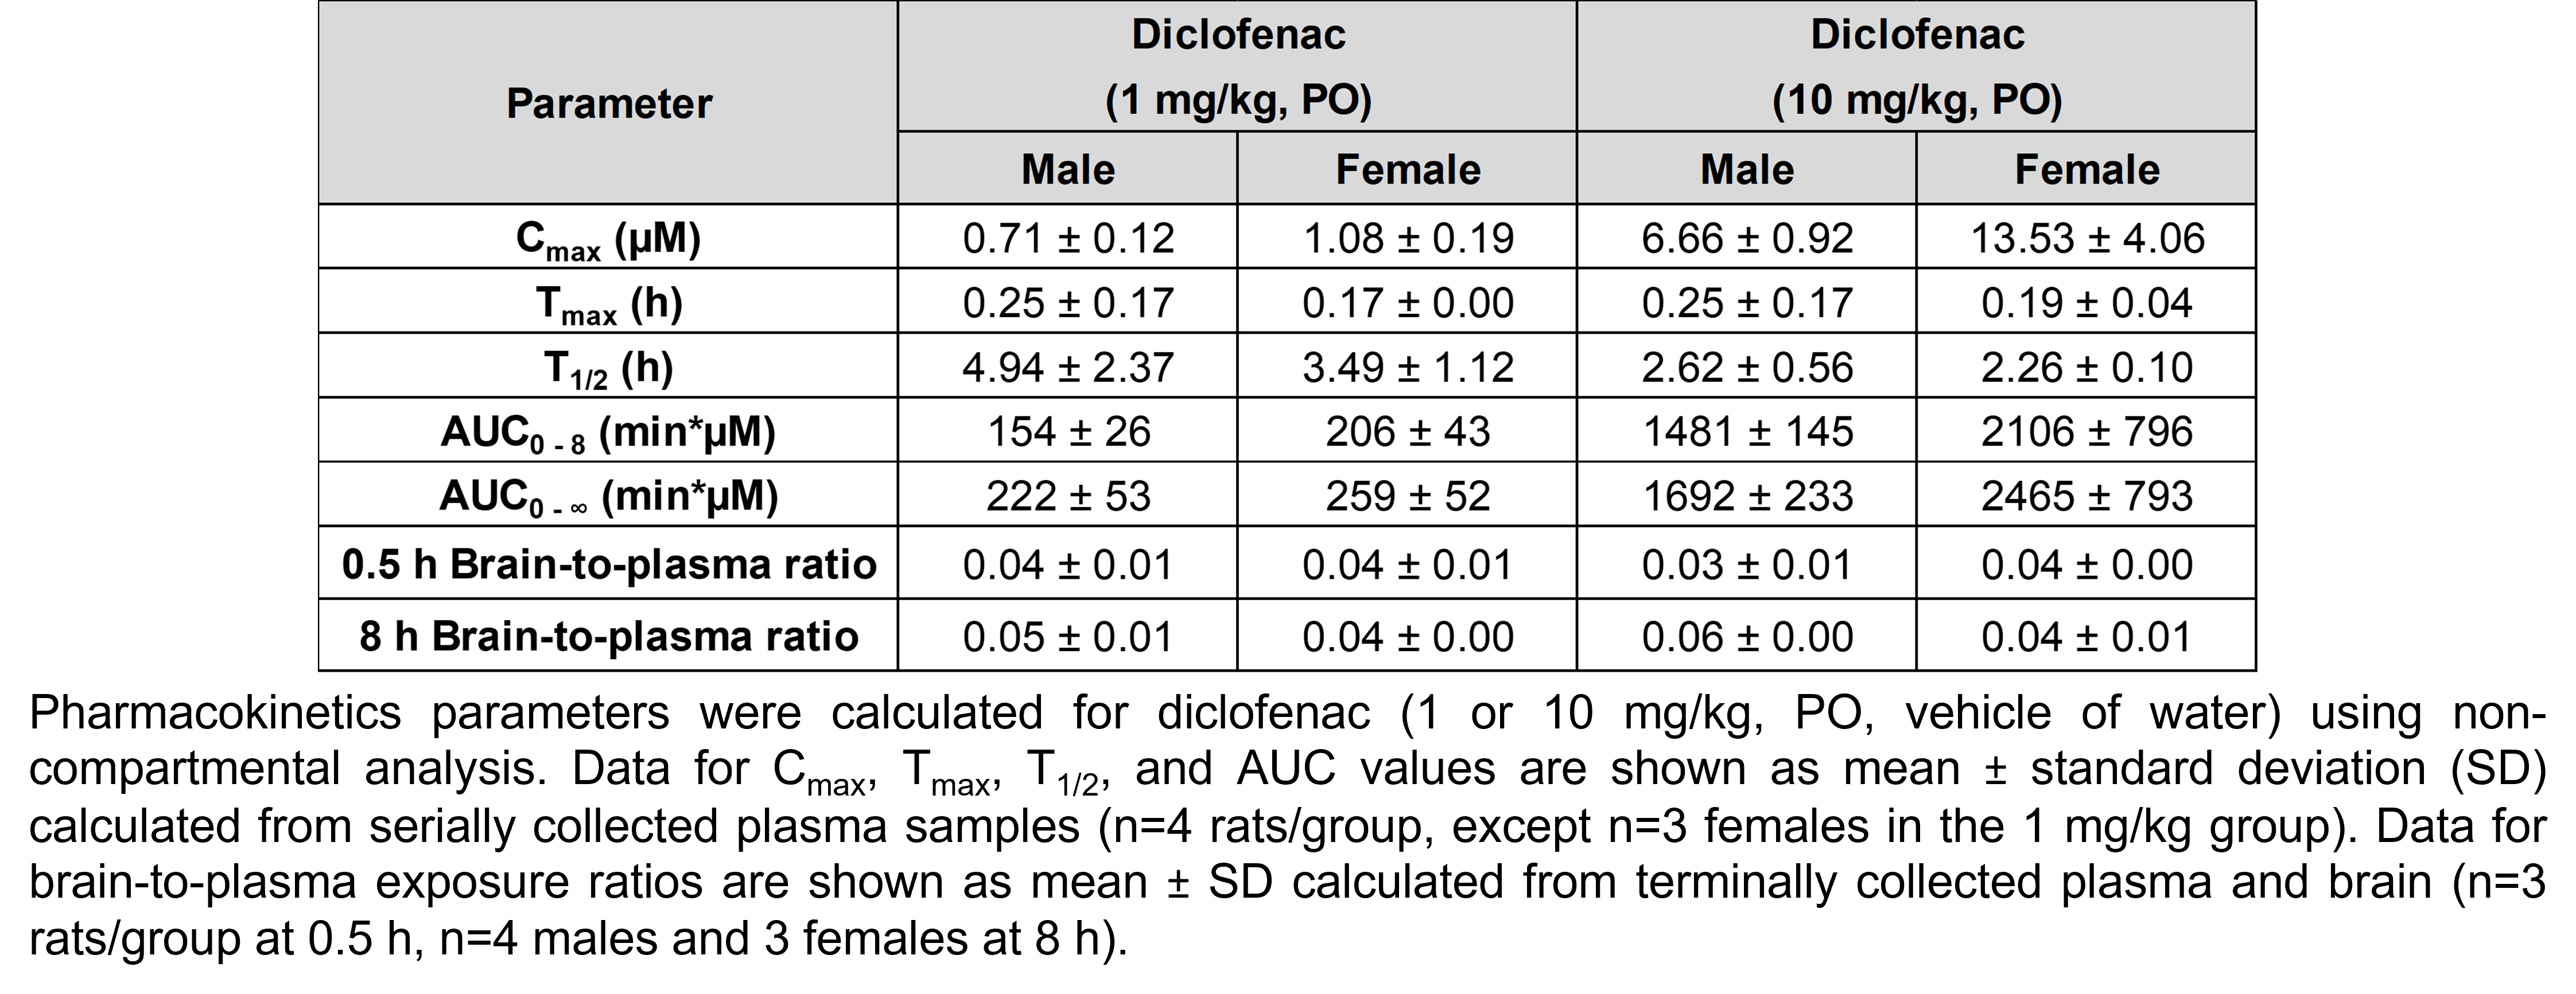 A table shows pharmacokinetics parameters calculated for diclofenac using non-compartmental analysis in male and female rats treated with diclofenac (1 or 10 mg/kg, PO, vehicle of water). The means for the 4 groups (males and females treated with 1 mg/kg diclofenac and males and females treated with 10 mg/kg diclofenac, respectively) are as follows. The highest concentration (Cmax) was 0.71, 1.08, 6.66, and 13.53 µM; the time at the maximum concentration (Tmax) was 0.25, 0.17, 0.25, and 0.19 hours; the half-life (T1/2) was 4.94, 3.49, 2.62, and 2.26 hours; area under the curve for time 0 to 8 hours was 154, 206, 1481, and 2106 minutes*µM; area under the curve for time 0 to infinity was 222, 259, 1692, and 2465 minutes*µM; the brain-to-plasma ratio at 0.5 hour was 0.04, 0.04, 0.03, and 0.04; the brain-to-plasma ratio at 8 hours was 0.05, 0.04, 0.06, and 0.04.